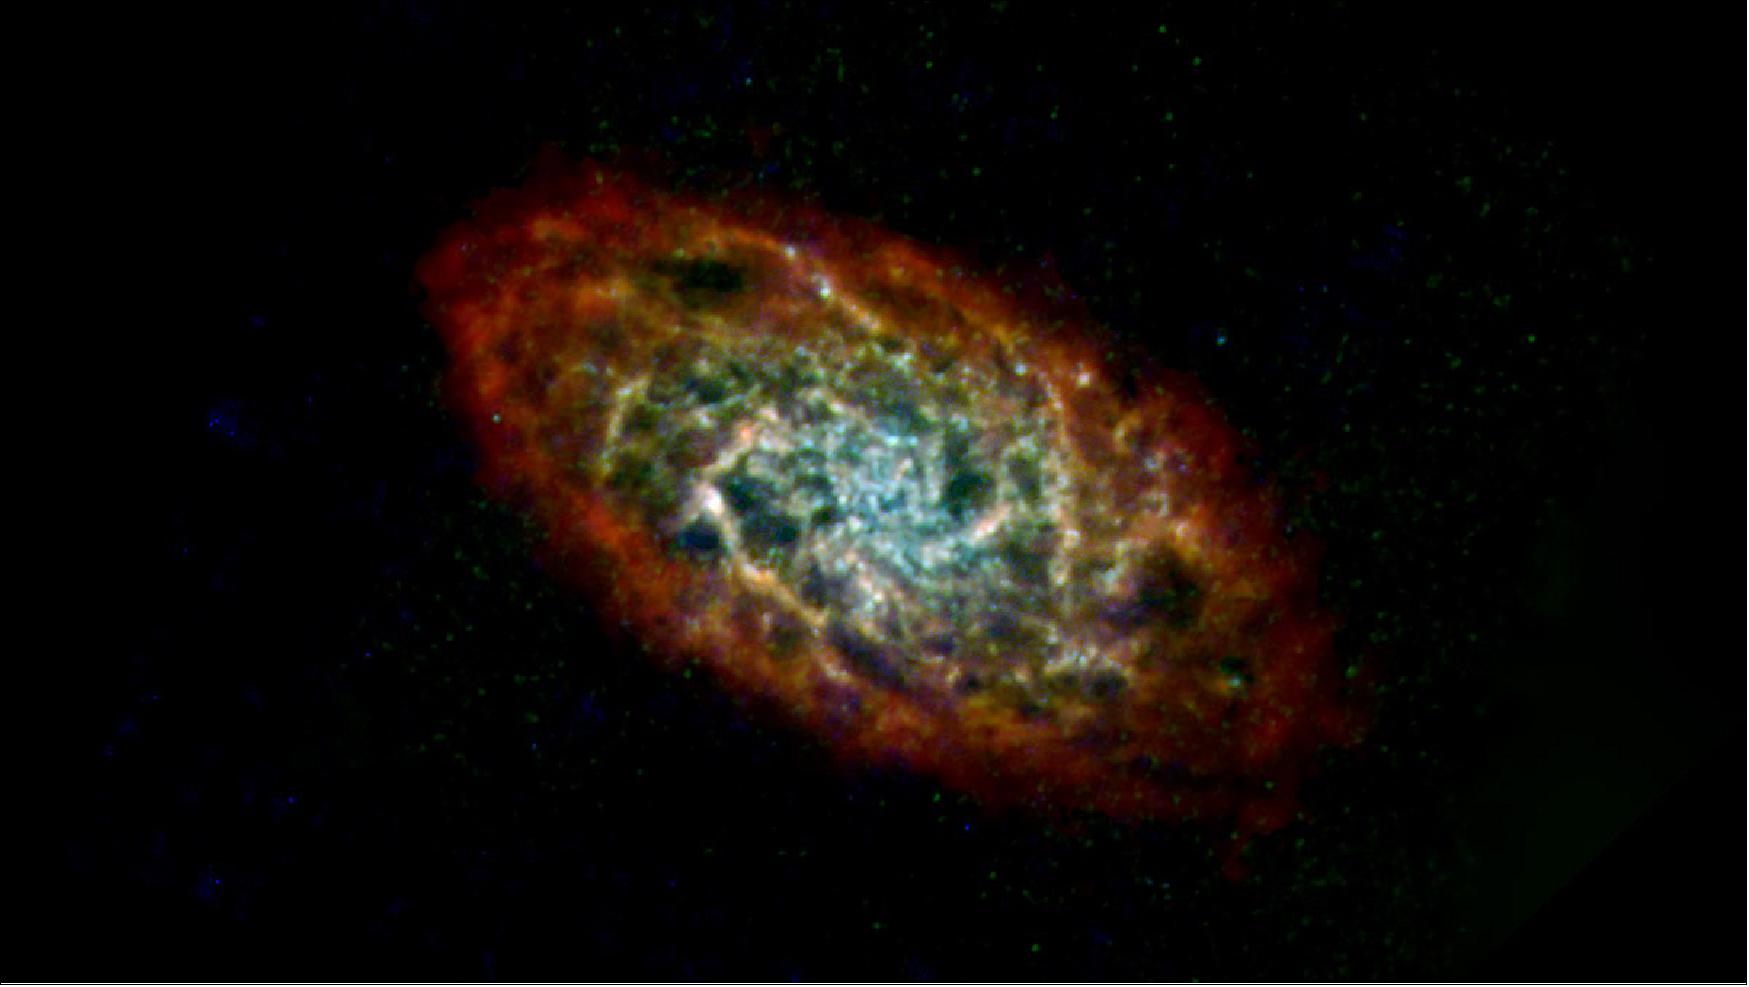 Figure 17: The Triangulum galaxy, or M33, is shown here in far-infrared and radio wavelengths of light. Some of the hydrogen gas (red) that traces the edge of the Triangulum’s disc was pulled in from intergalactic space, and some was torn away from galaxies that... [image credit: ESA/NASA/JPL-Caltech/GBT/VLA/IRAM/C. Clark (STScI)]